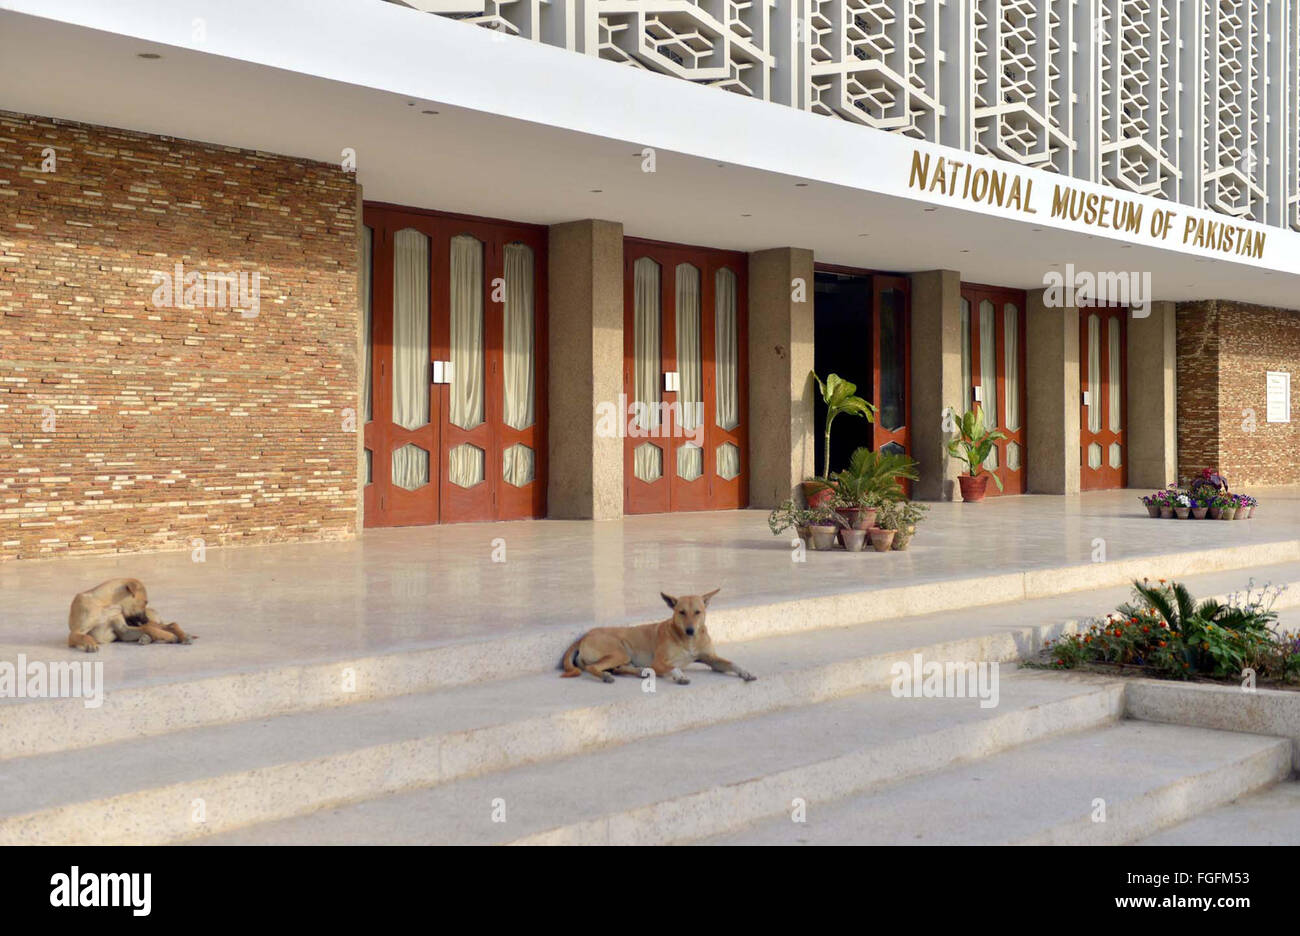 Street dogs entered into National Museum premises and sitting on stairs may harmful for visitors showing negligence of watchmen, in Karachi on Friday, February 19, 2016. Stock Photo